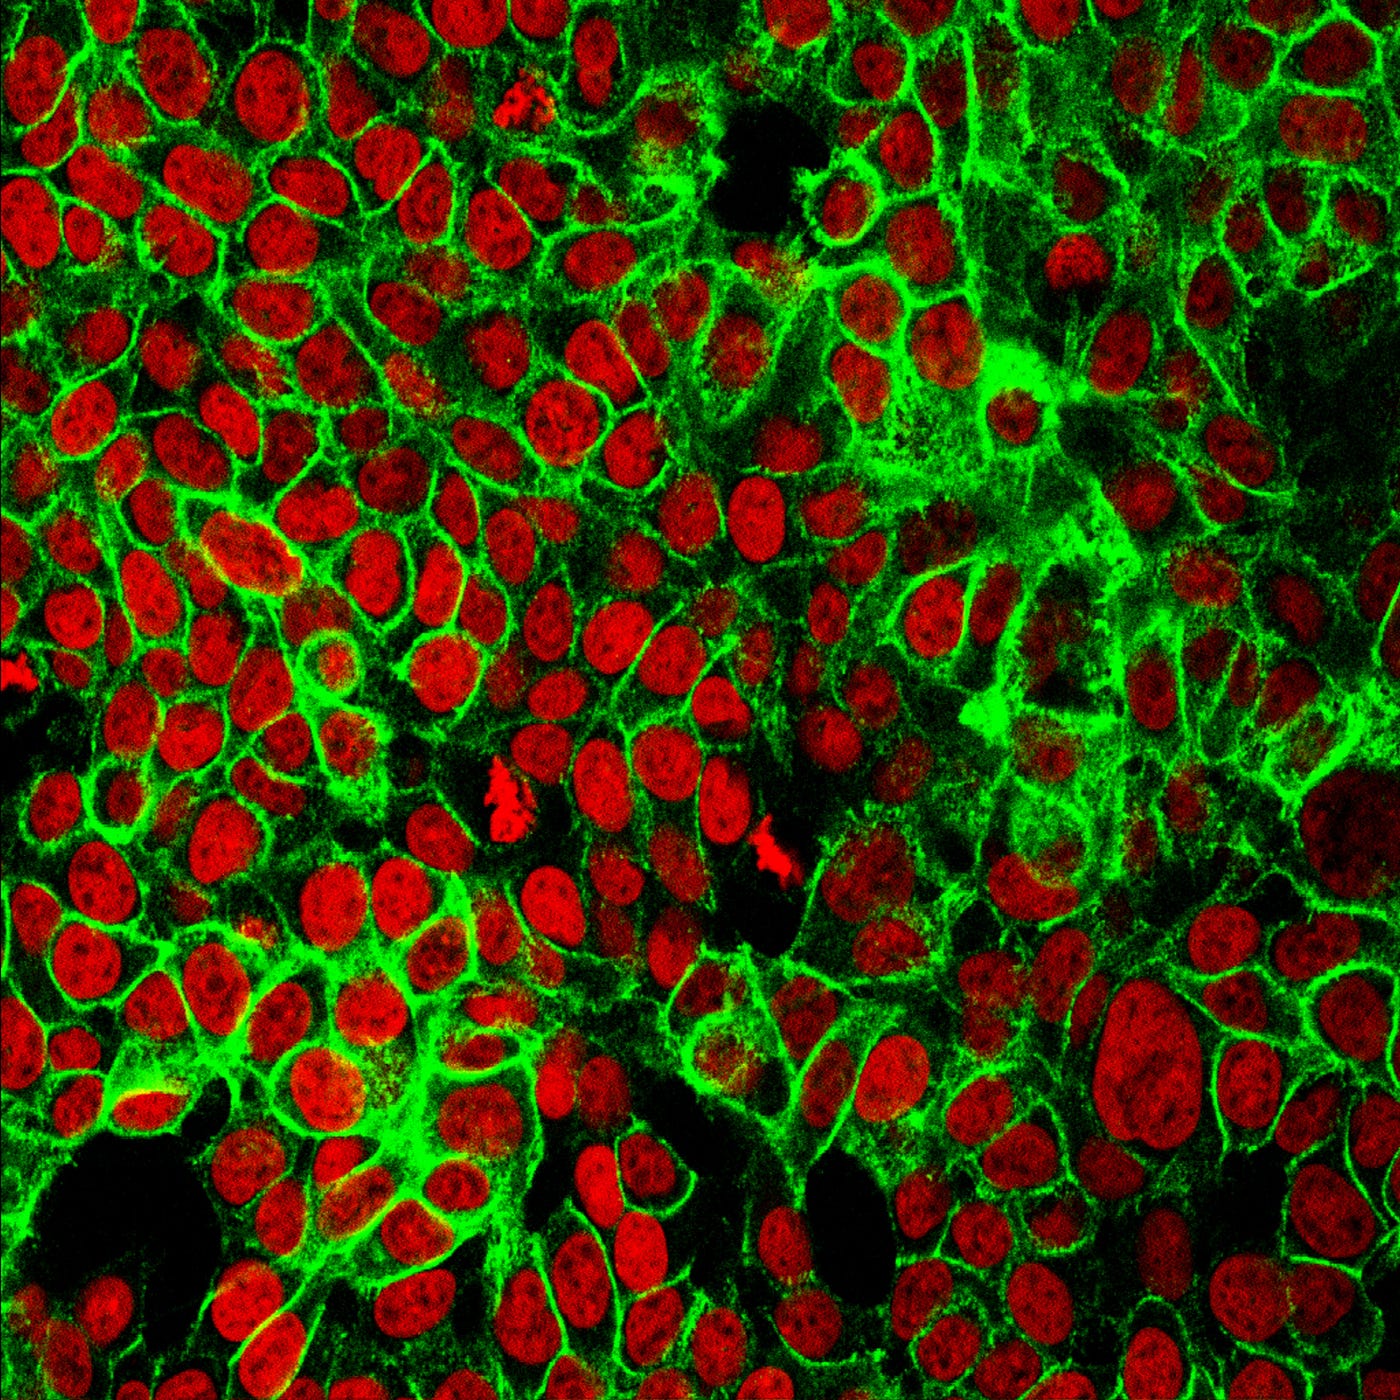 Image of red and green colored cancer cells. There are four cancers for which we have screening: Breast, cervix, colorectal, and lung.